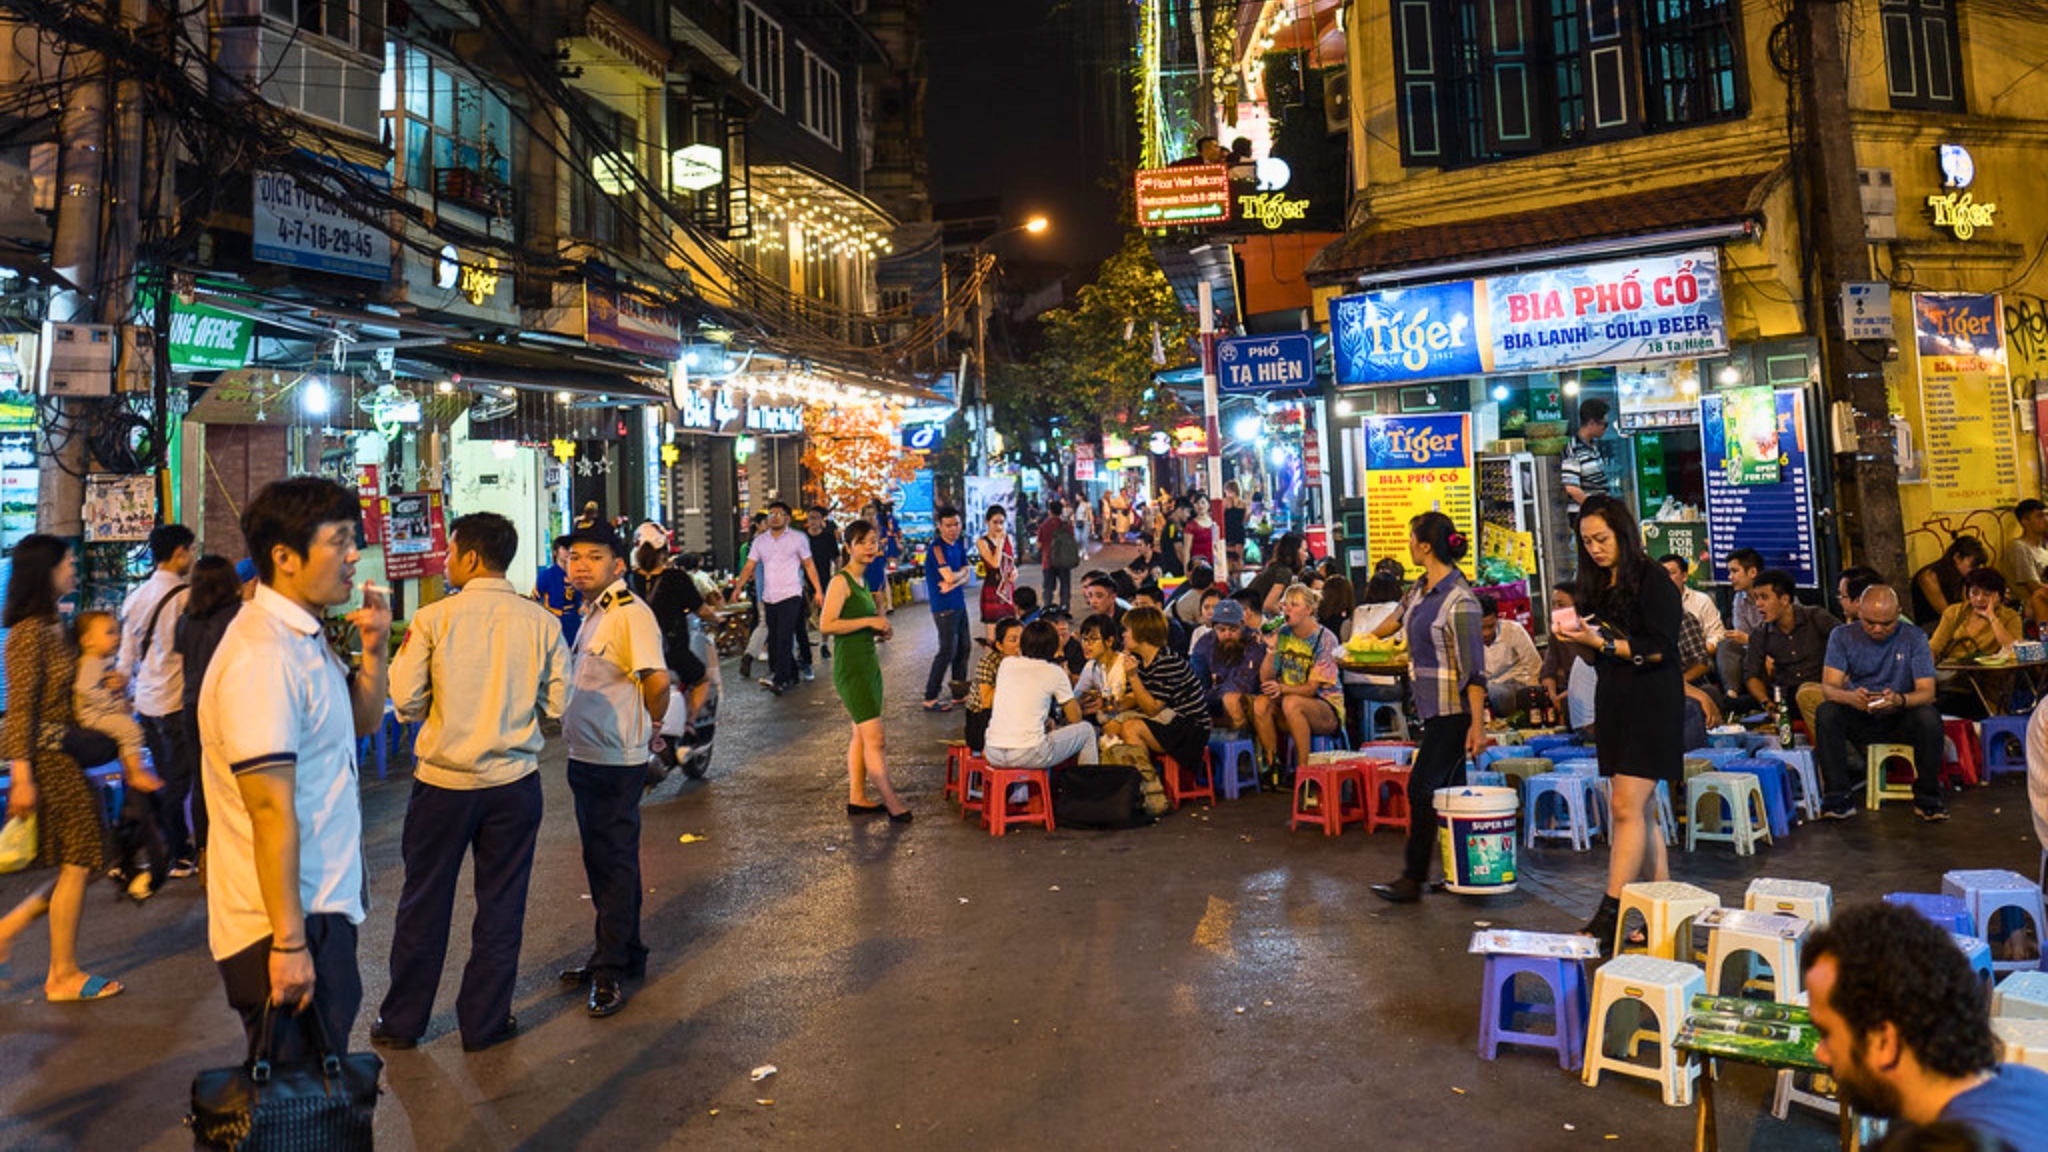 Ta Hien Street Is Often Referred To As Beer Street (Cre Flickr)